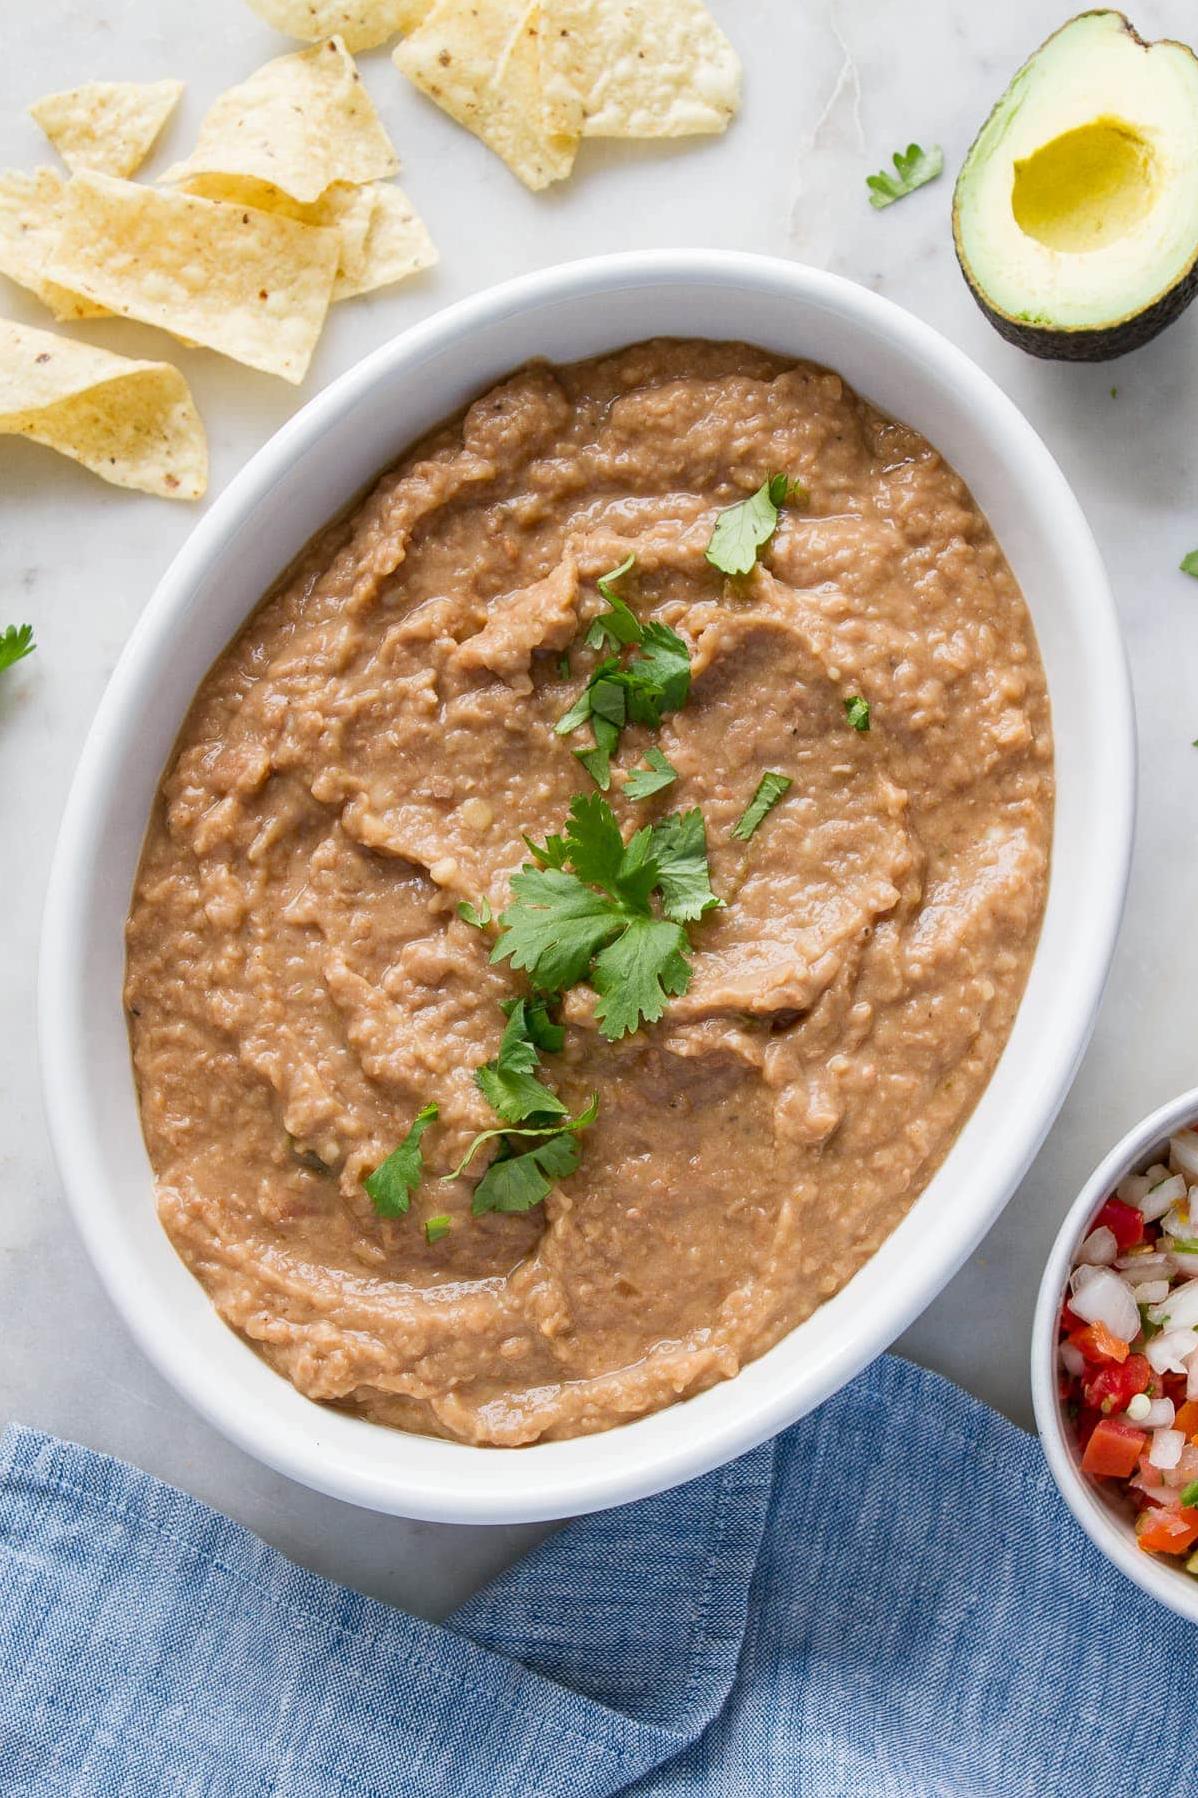  These refried beans are so good, you won't even miss the cheese!